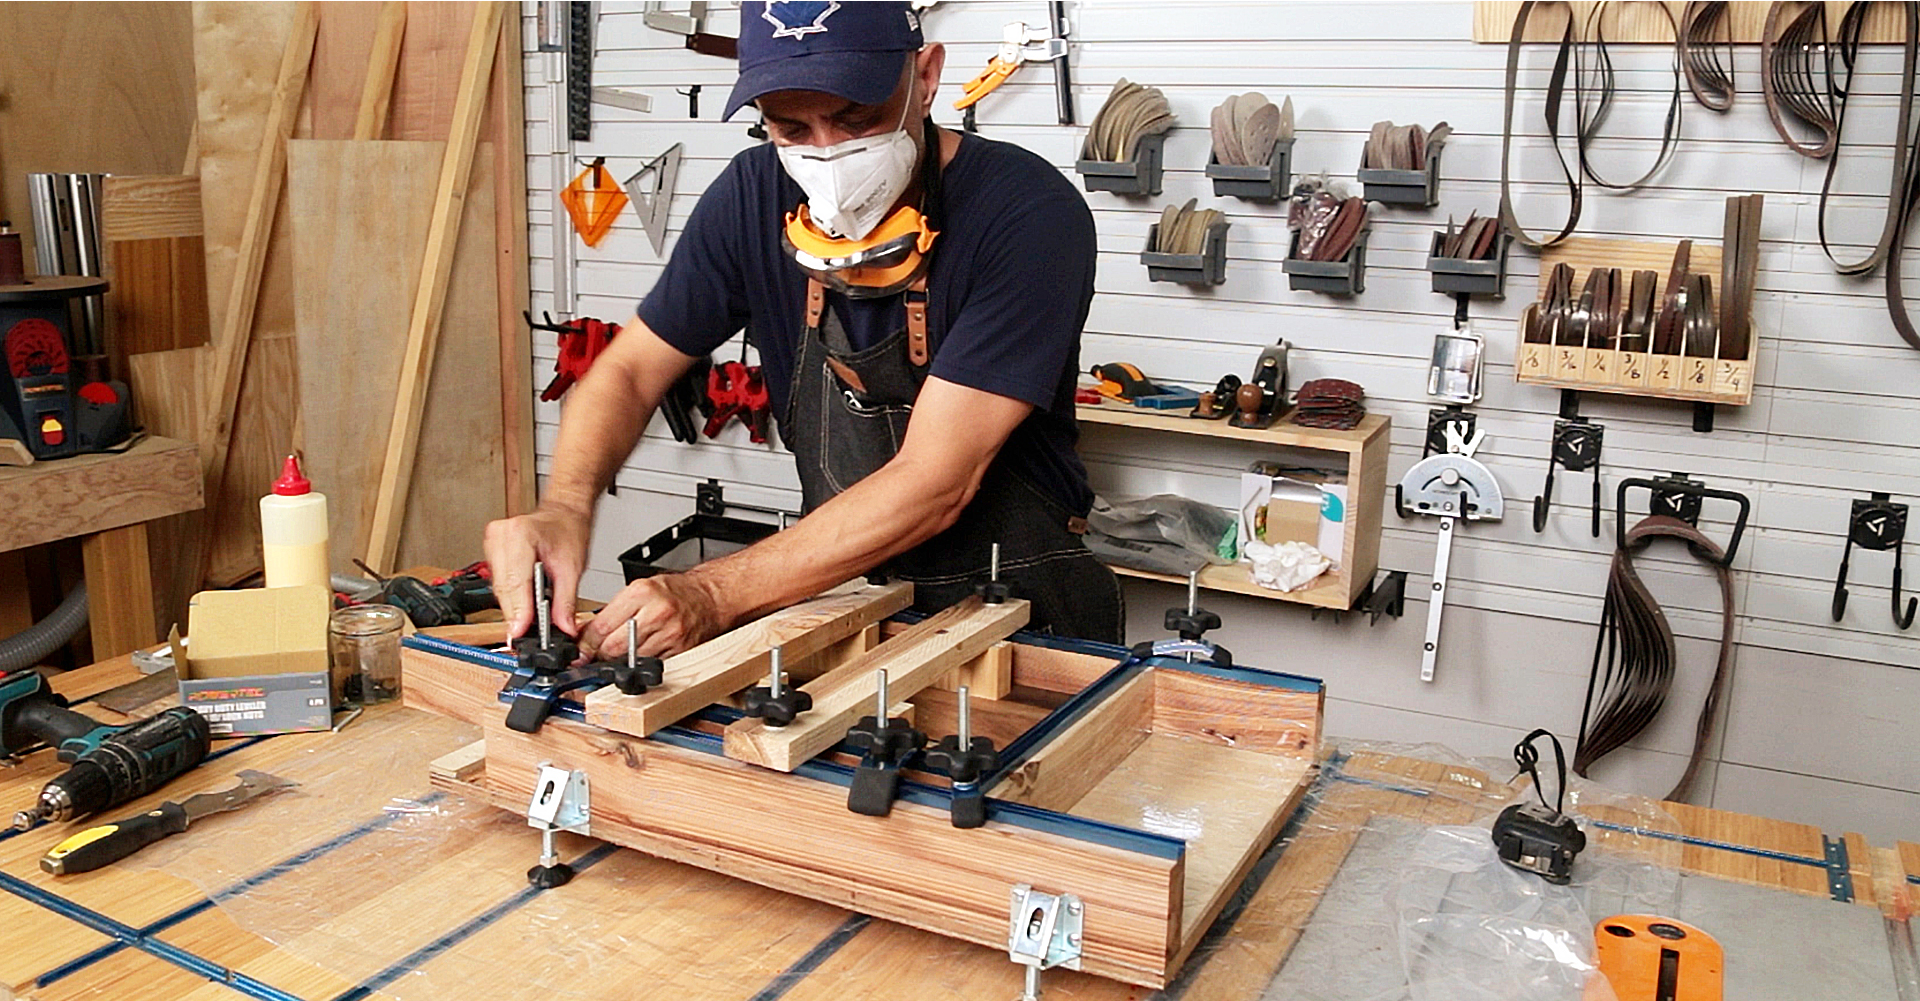 Holiday Gift Inspirations: Working with Epoxy - POWERTEC Woodworking Tools & Accessories